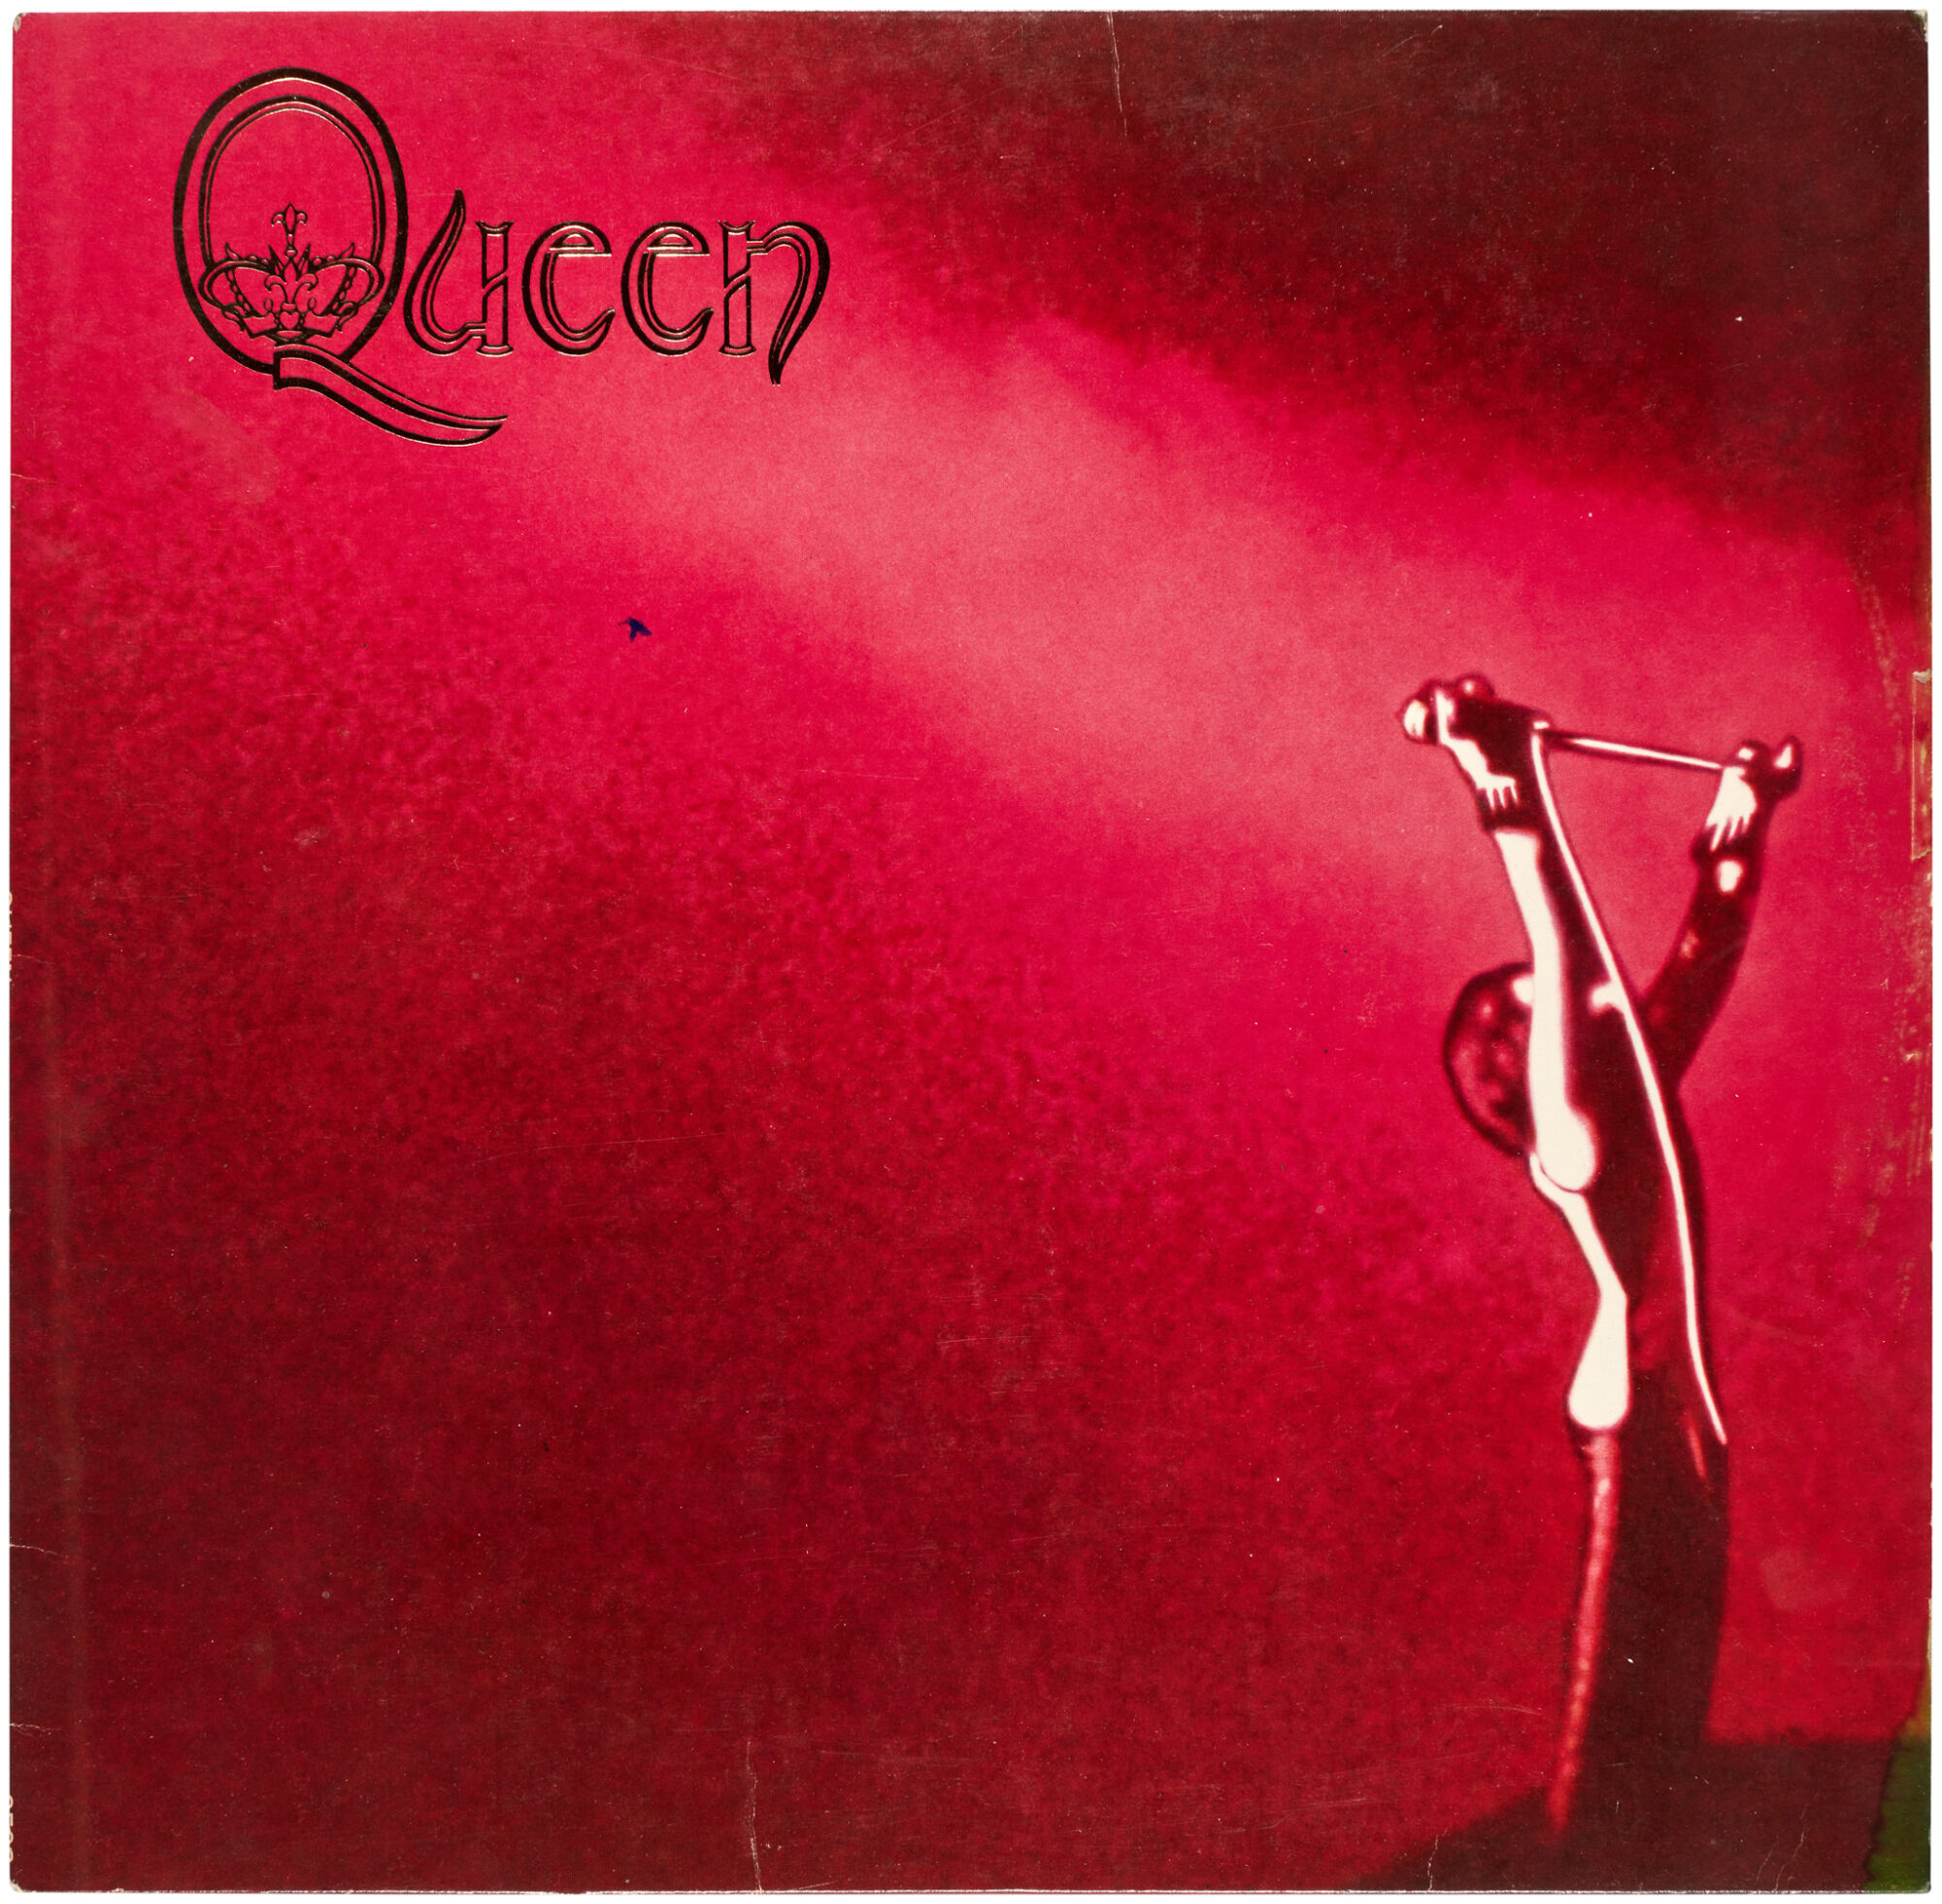 The Wick - Freddie Mercury's copy of Queen's first album (front), courtesy of Sotheby's